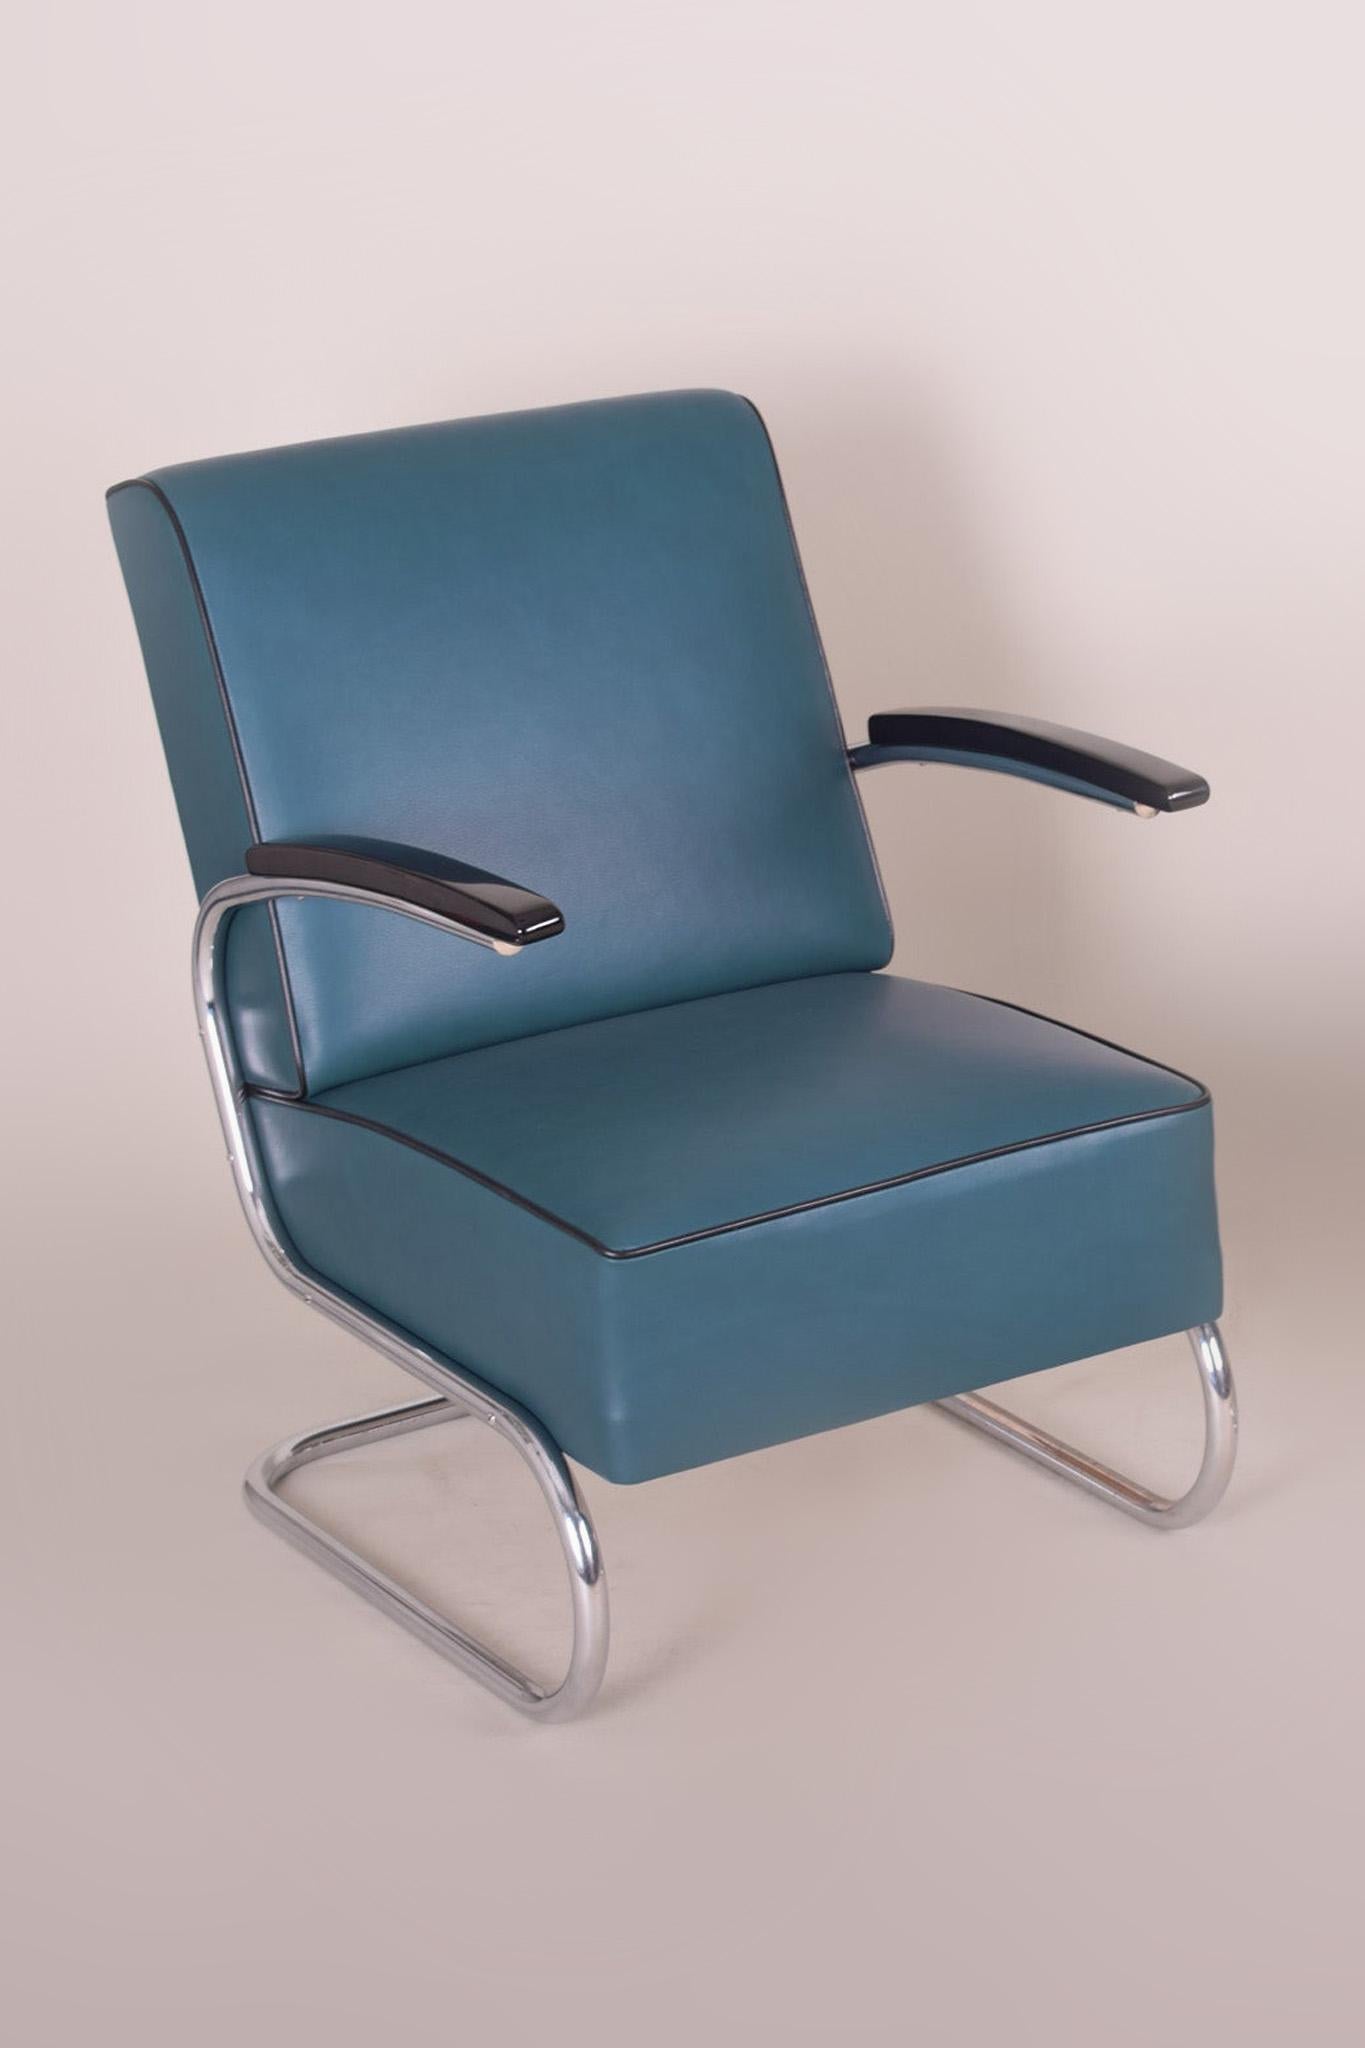 20th Century Tubular Steel Cantilever Armchair in Art Deco, Chrome, New Blue Leather, 1930s For Sale